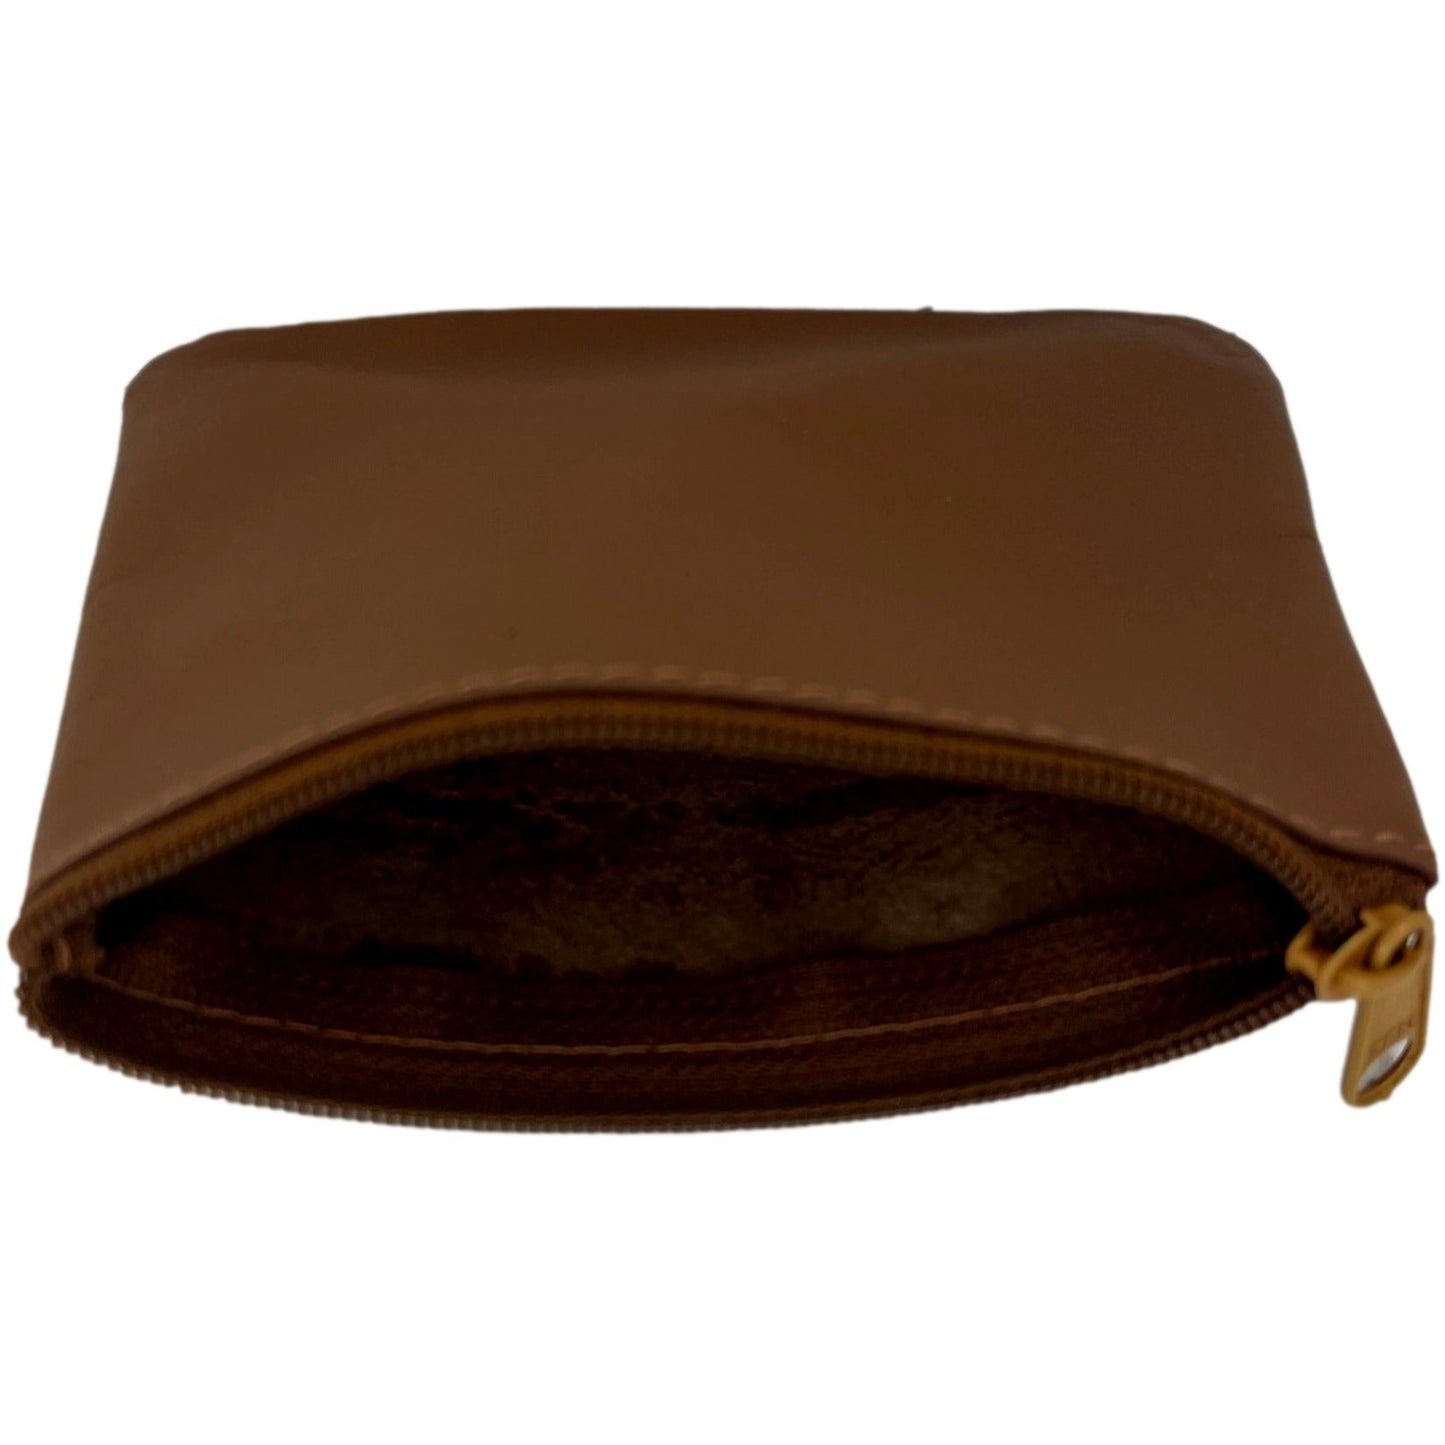 Brown Genuine Leather Coin Pouch